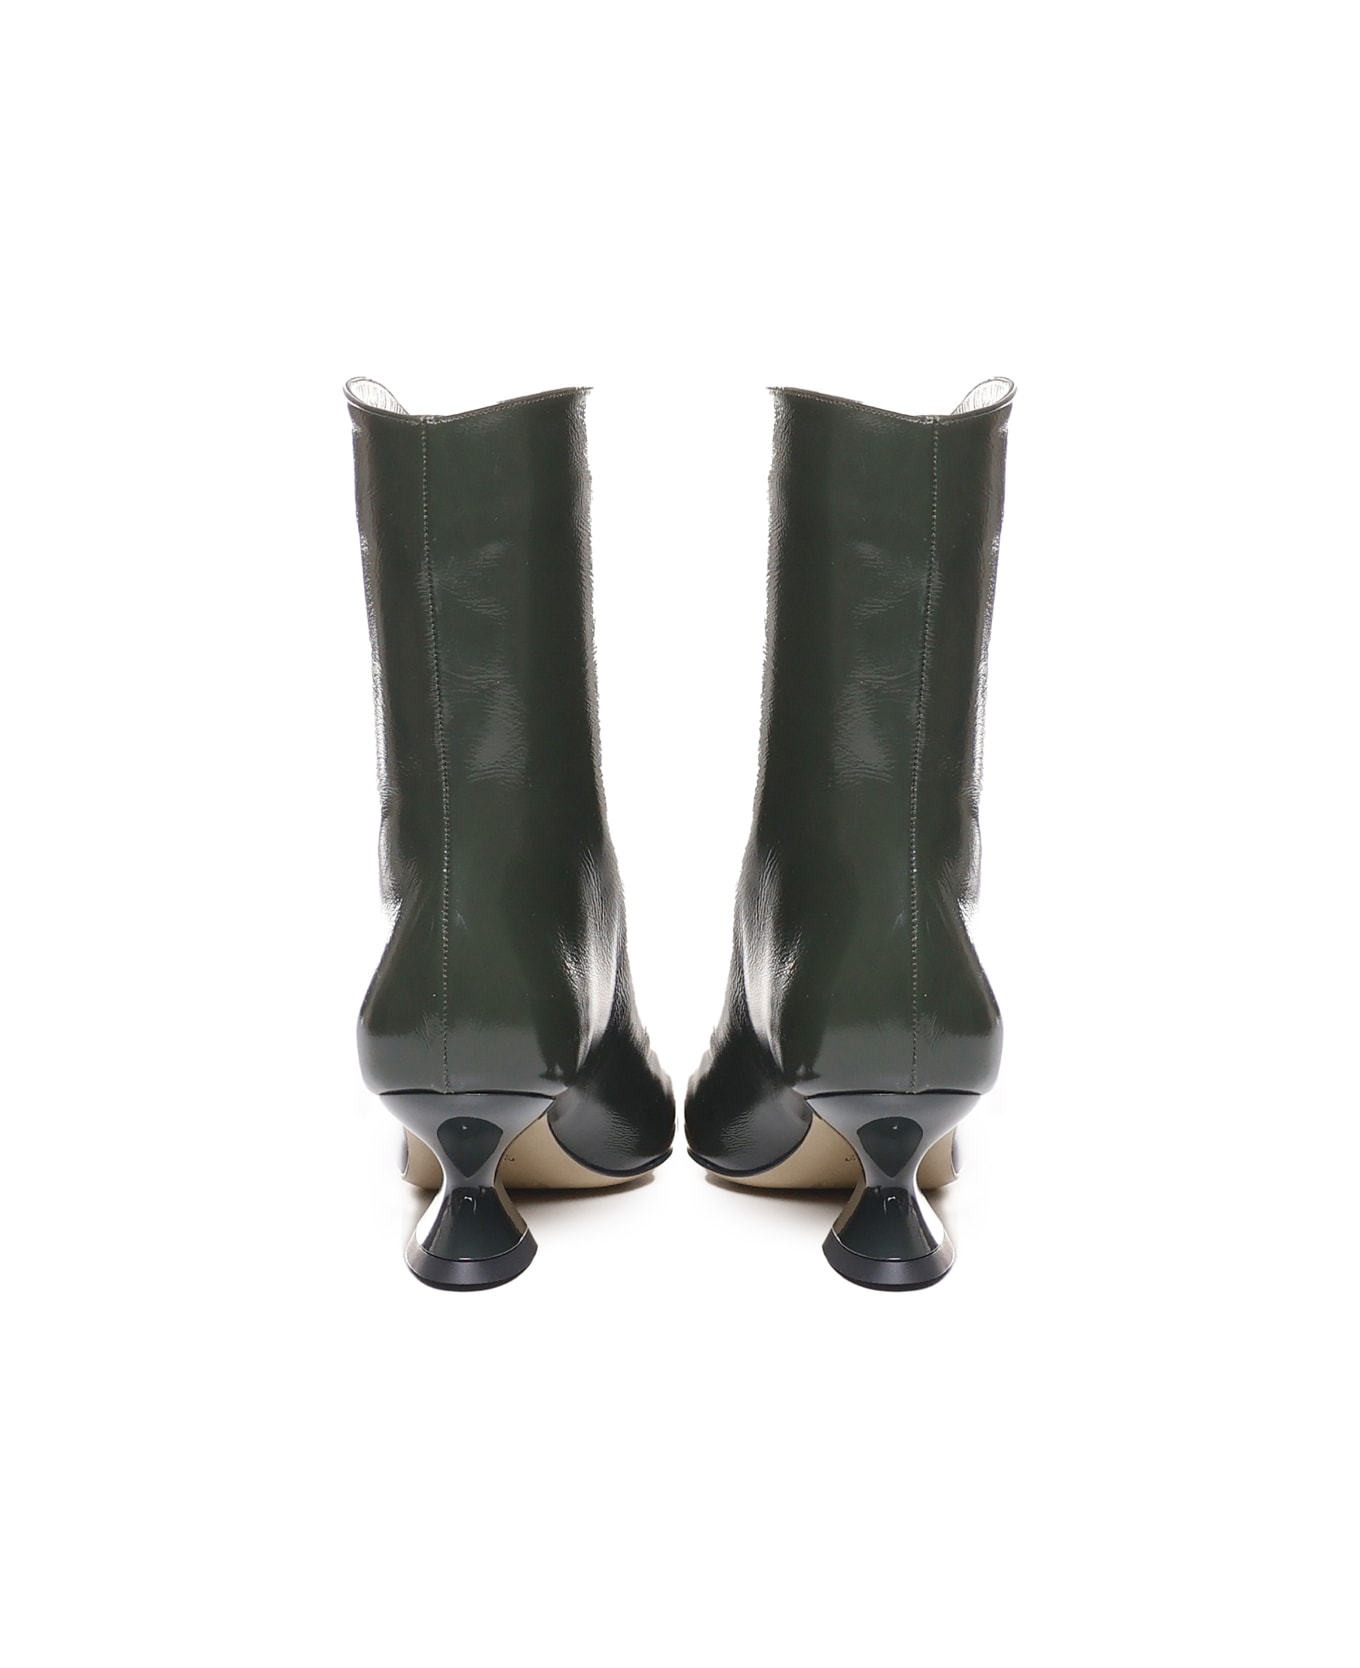 Alchimia Leather Ankle Boot With Low Heel - Green ブーツ